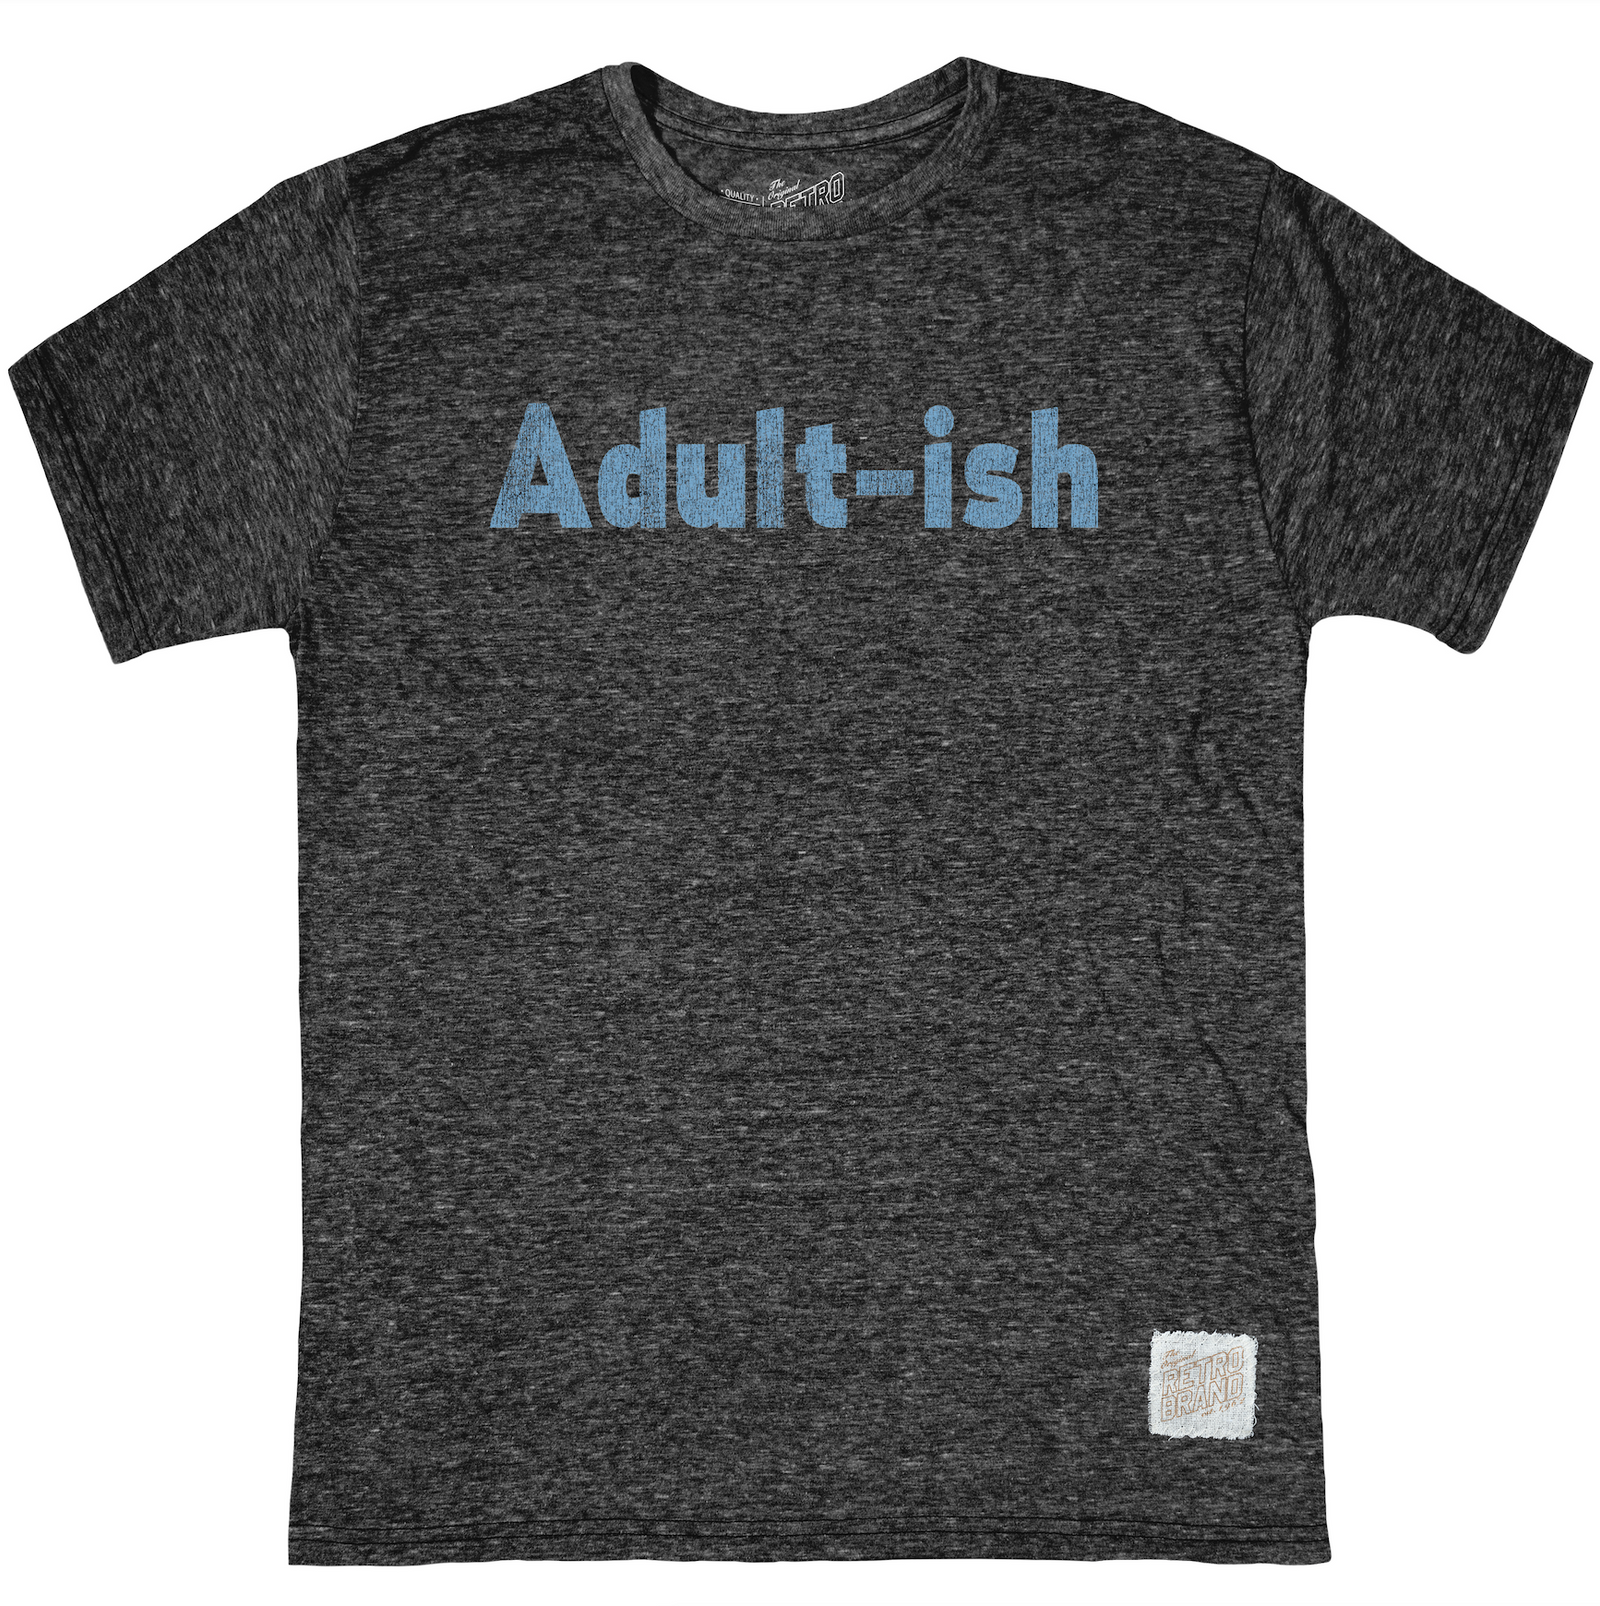 Adult-ish in blue text on streaky black tri-blend short sleeve shirt